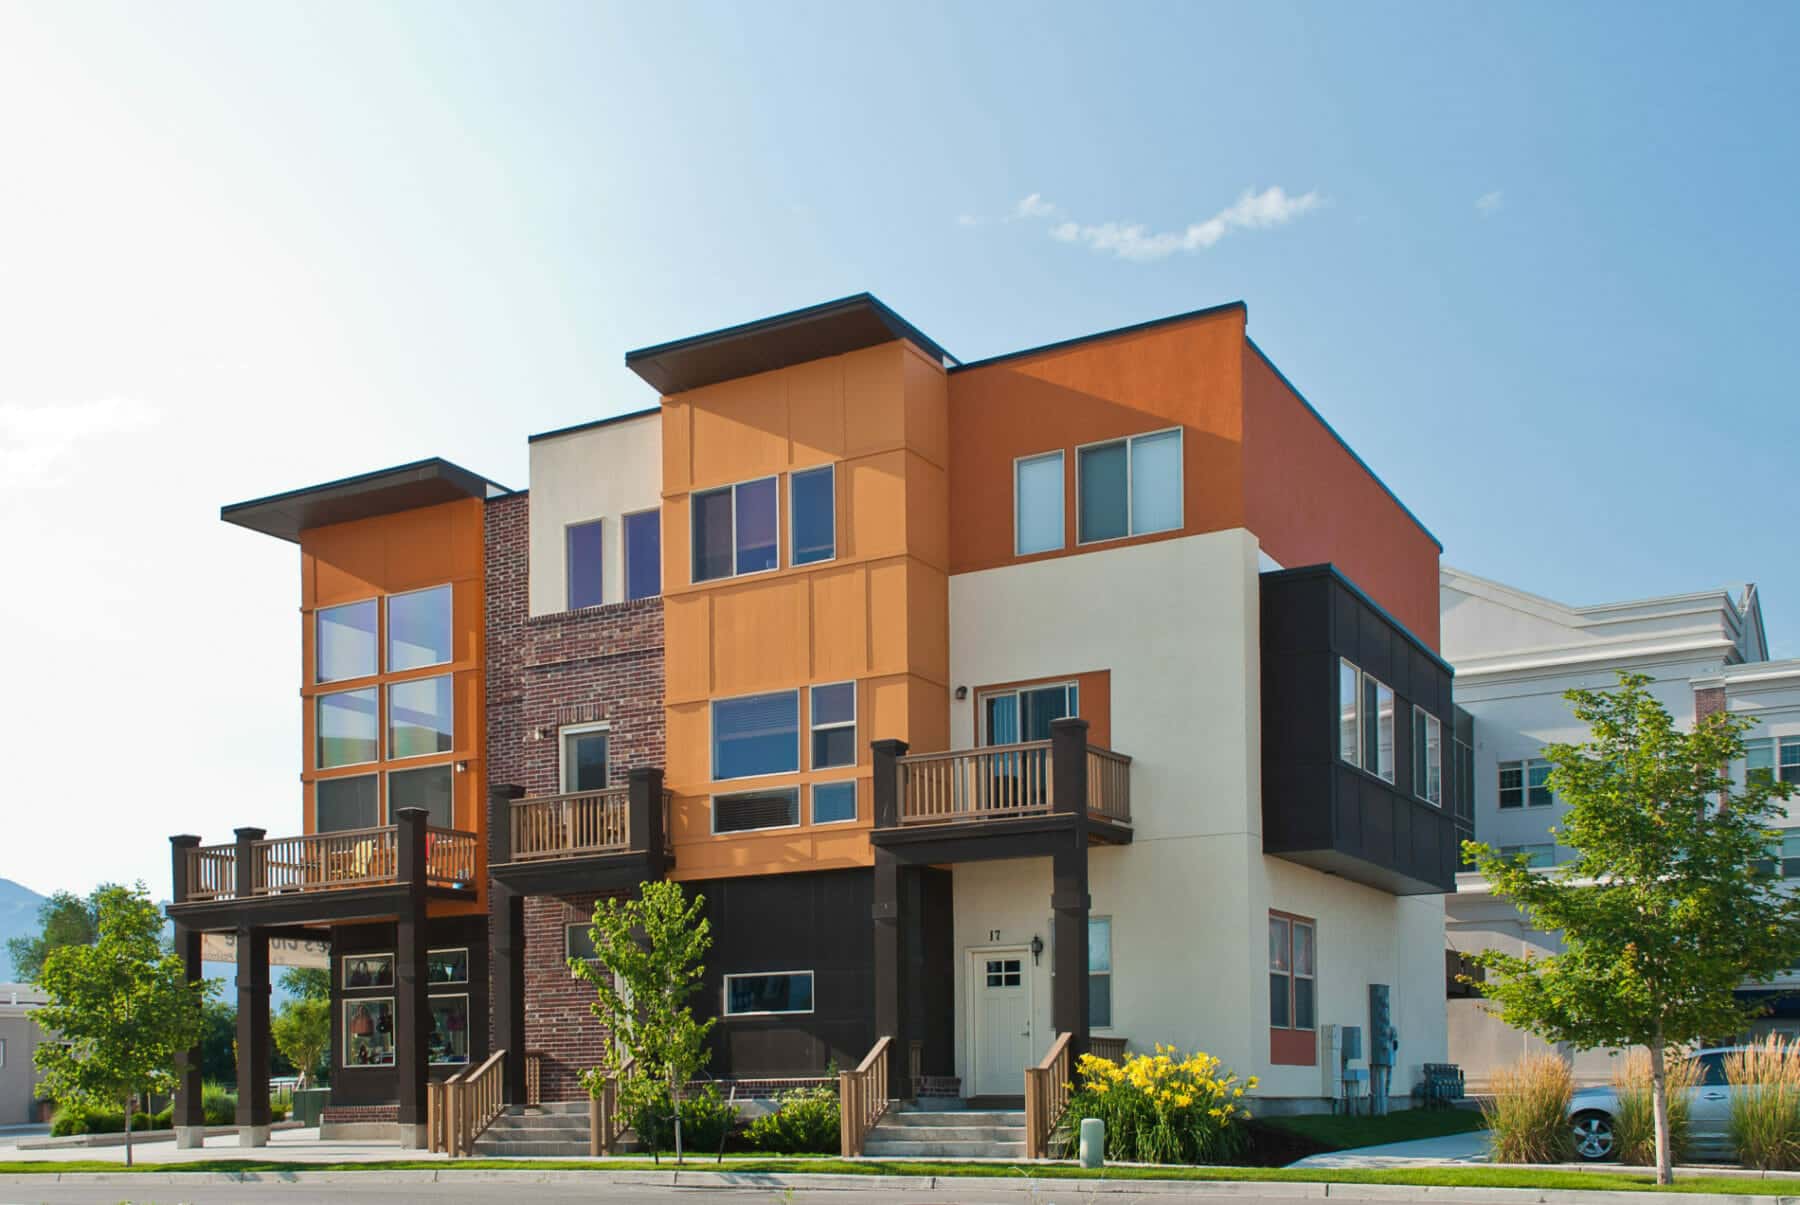 mixed-use building design | commercial and residential architects in Utah | Think Architecture